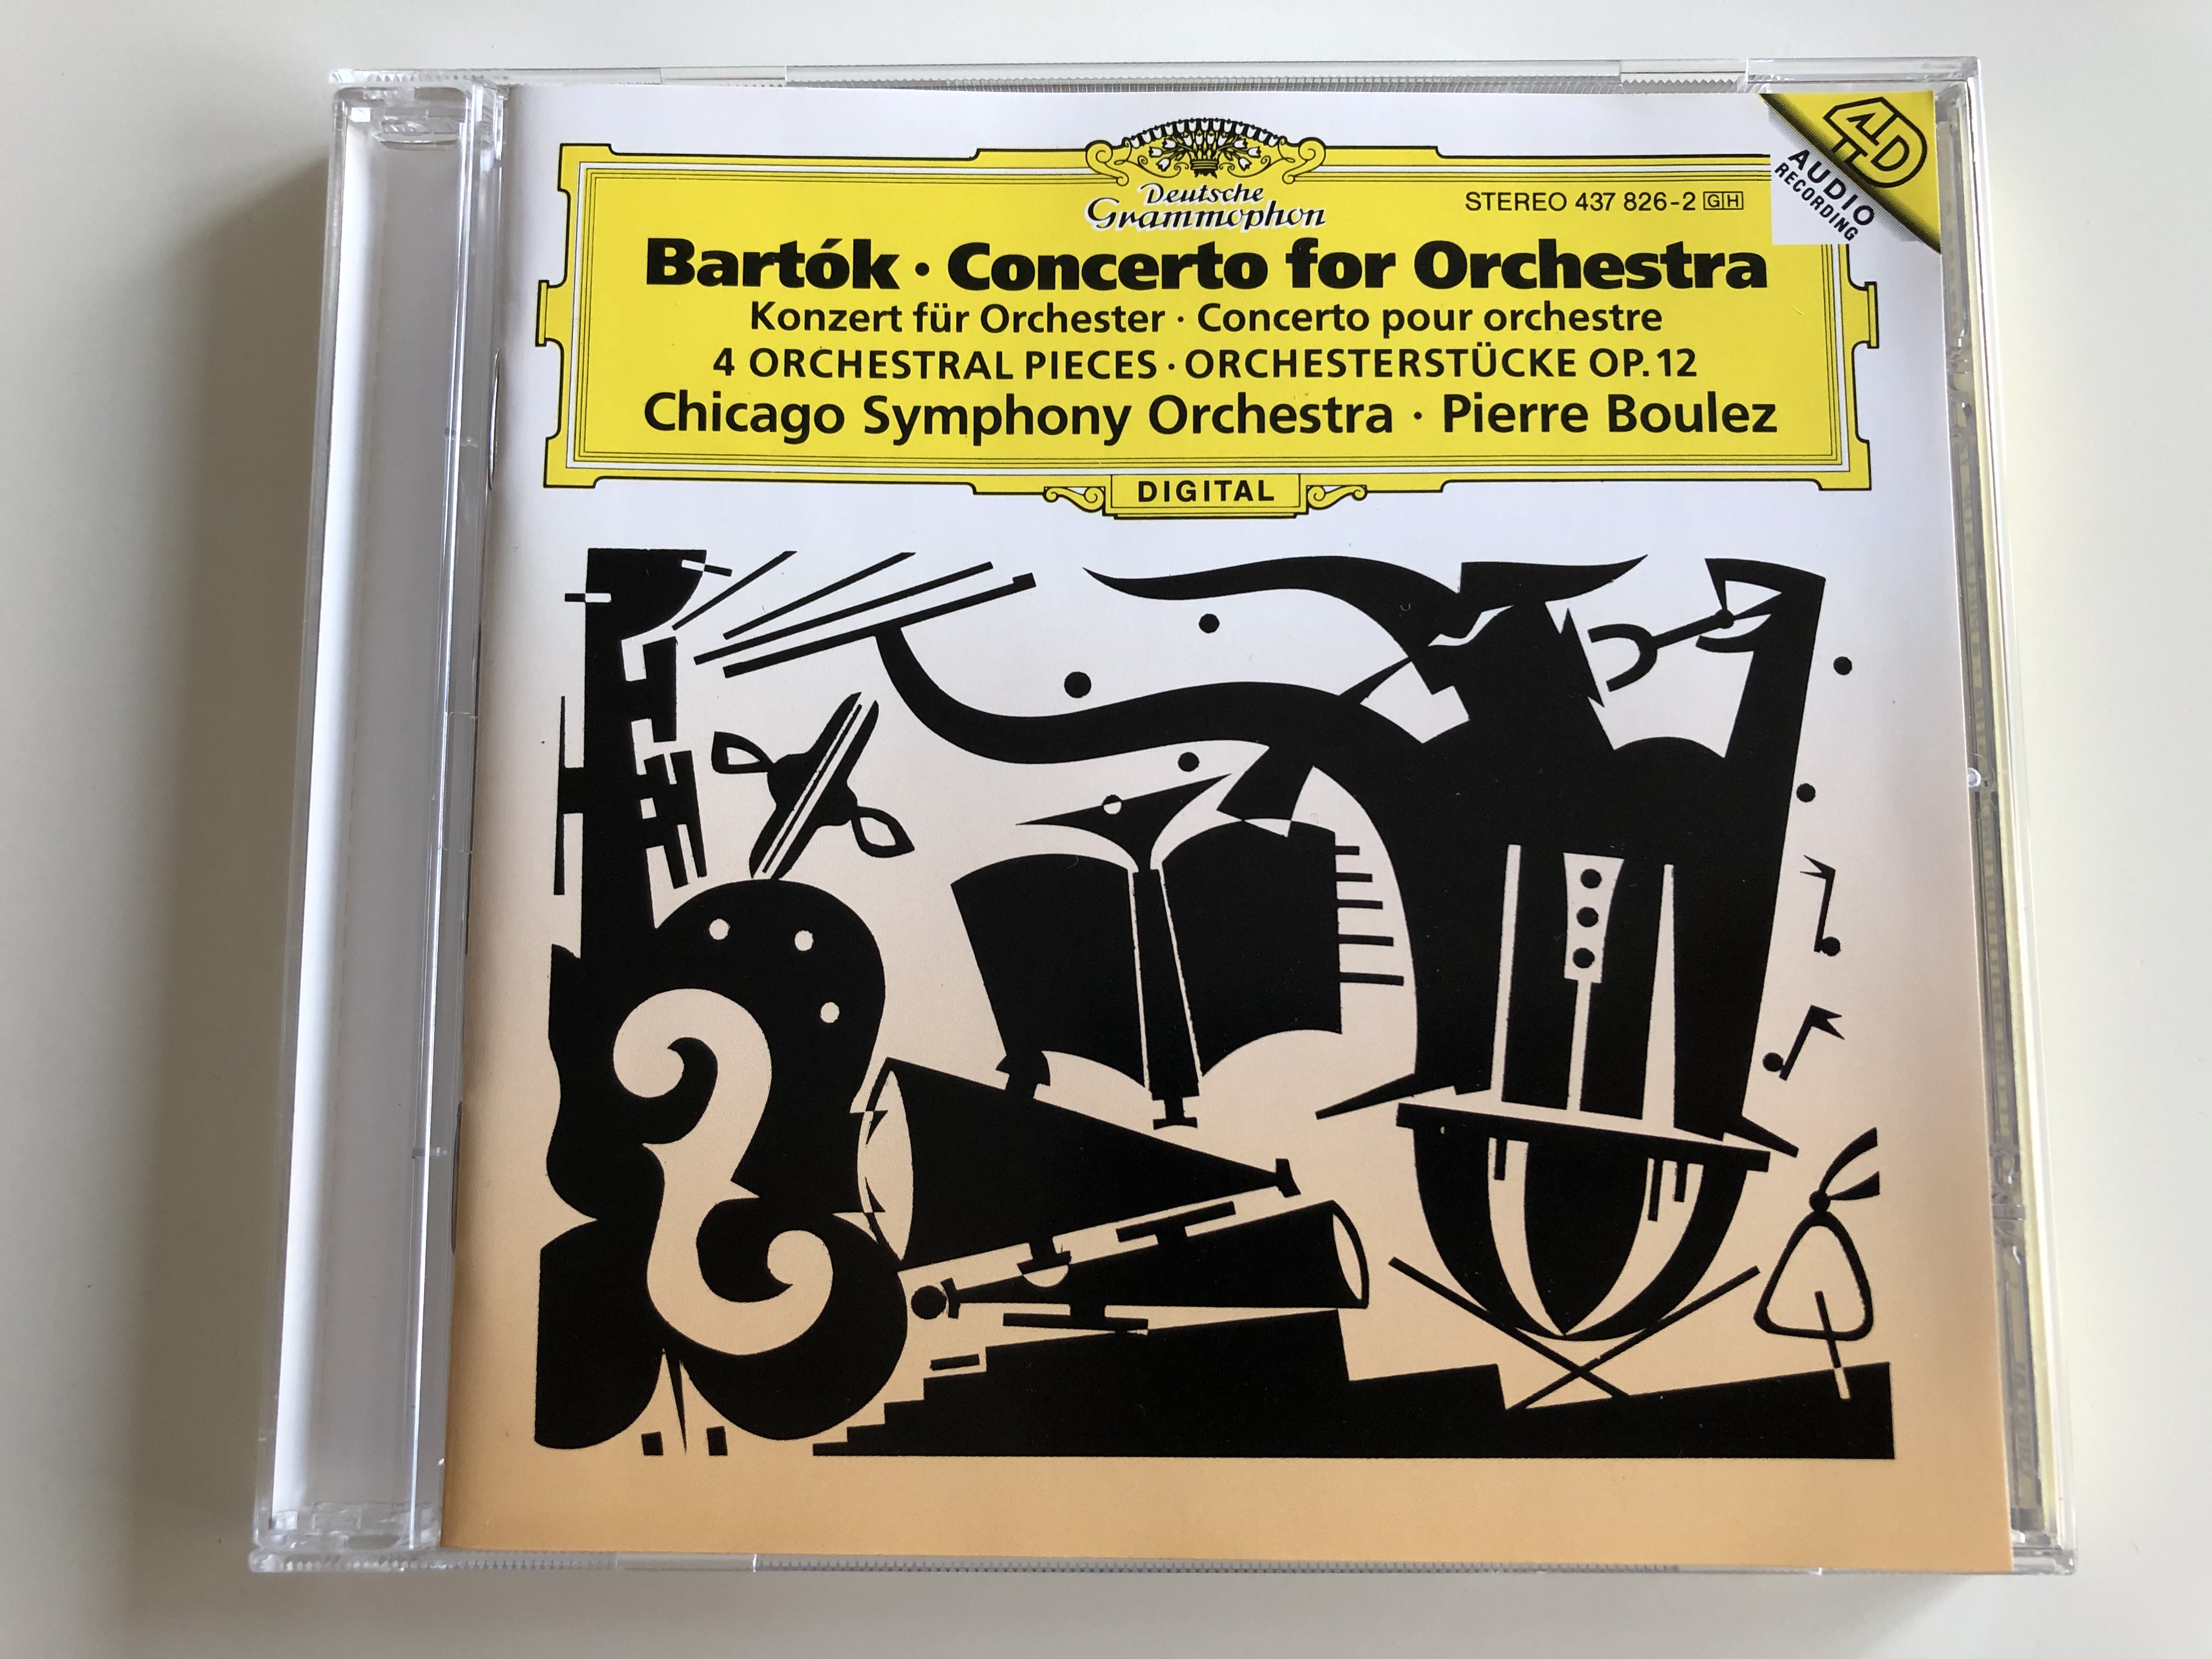 bart-k-concerto-for-orchestra-4-orchestral-pieces-orchesterstucke-op.-12-chicago-symphony-orchestra-pierre-boulez-deutsche-grammophon-audio-cd-1993-stereo-437-826-2-1-.jpg